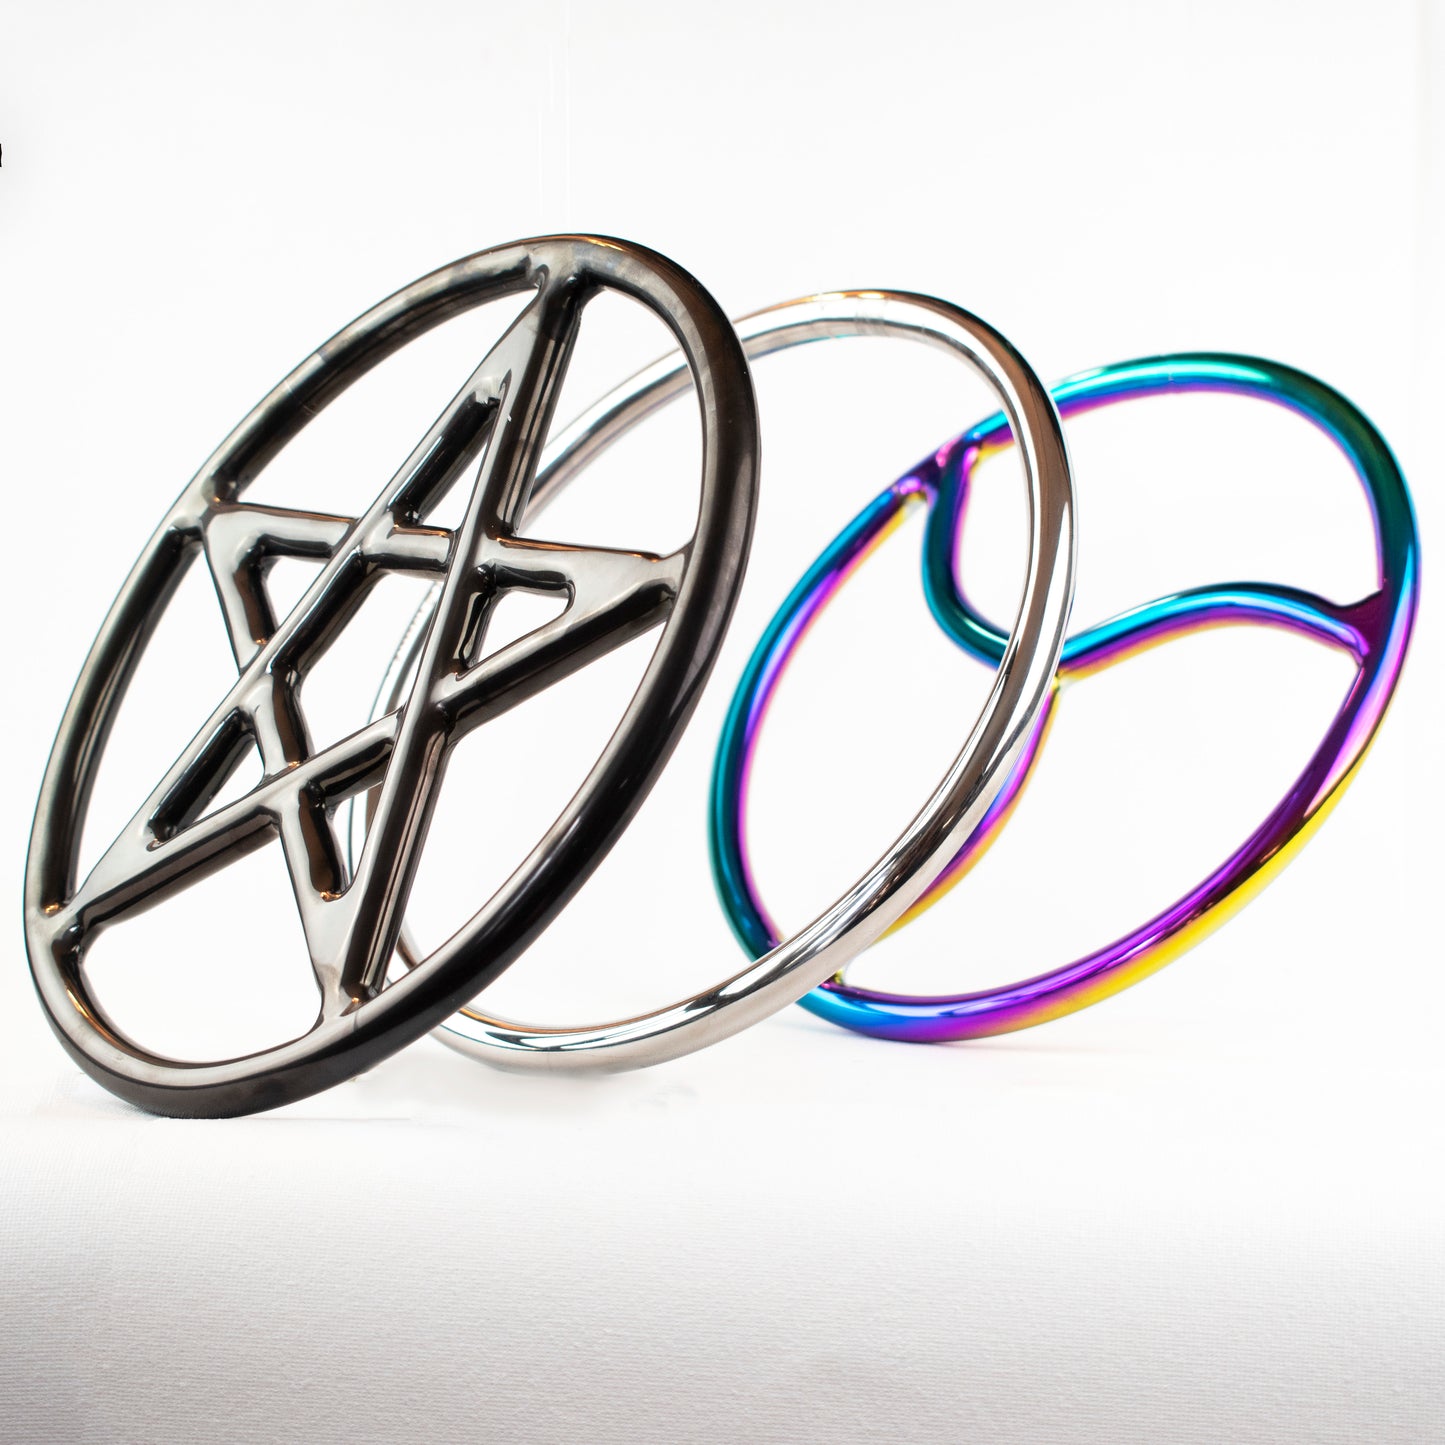 Classic Stainless Steel Suspension Rings 9" or 6"